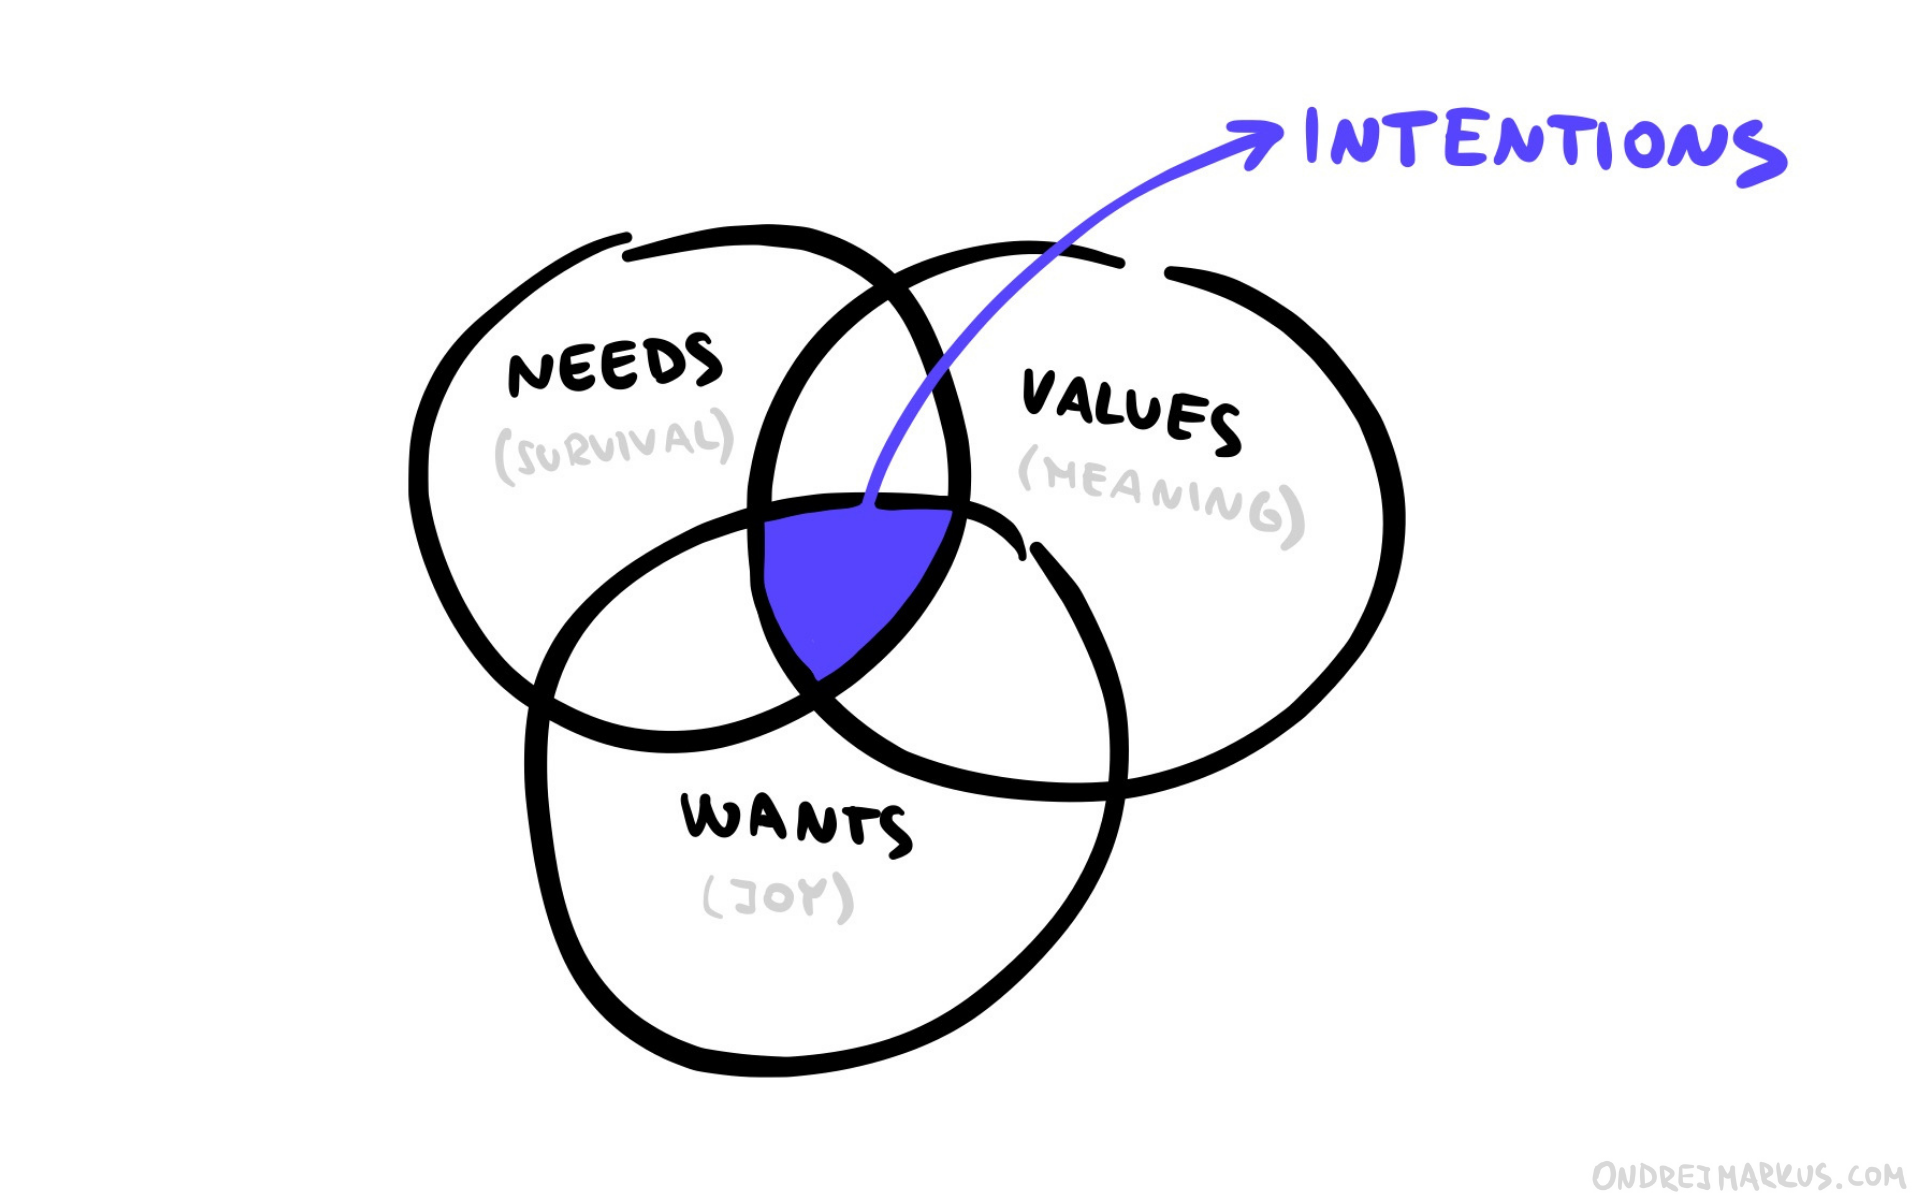 Intentions come from the intersection of needs, wants, and values.